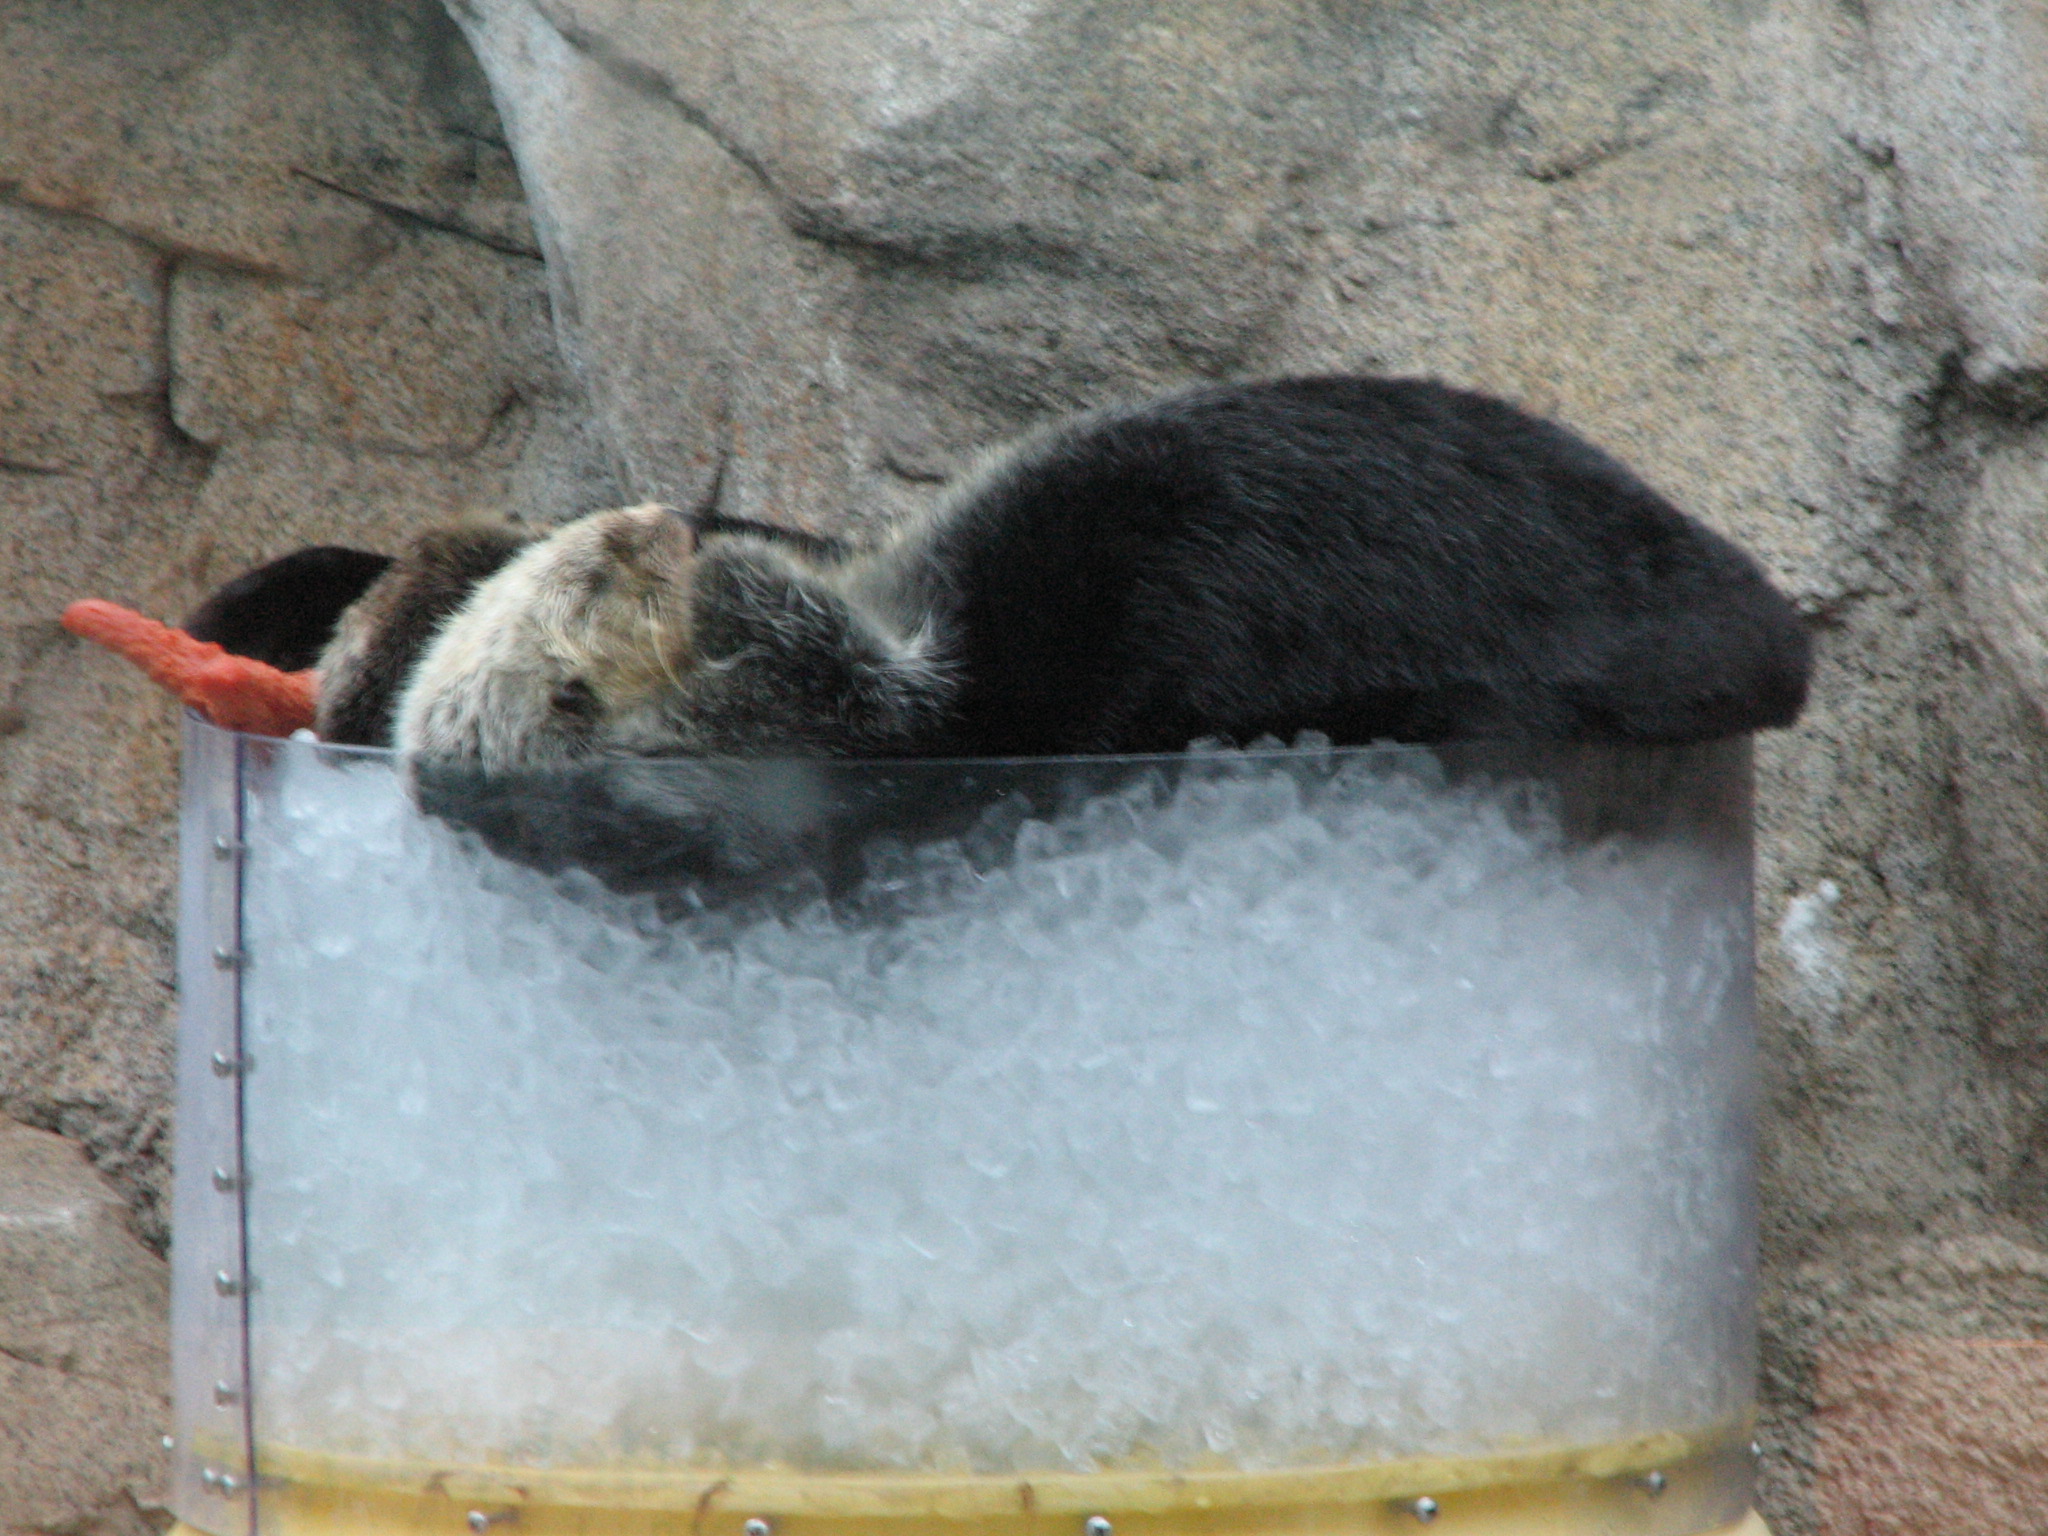 Sea Otters Relax in an Ice Tub with Their Toy Starfish 1